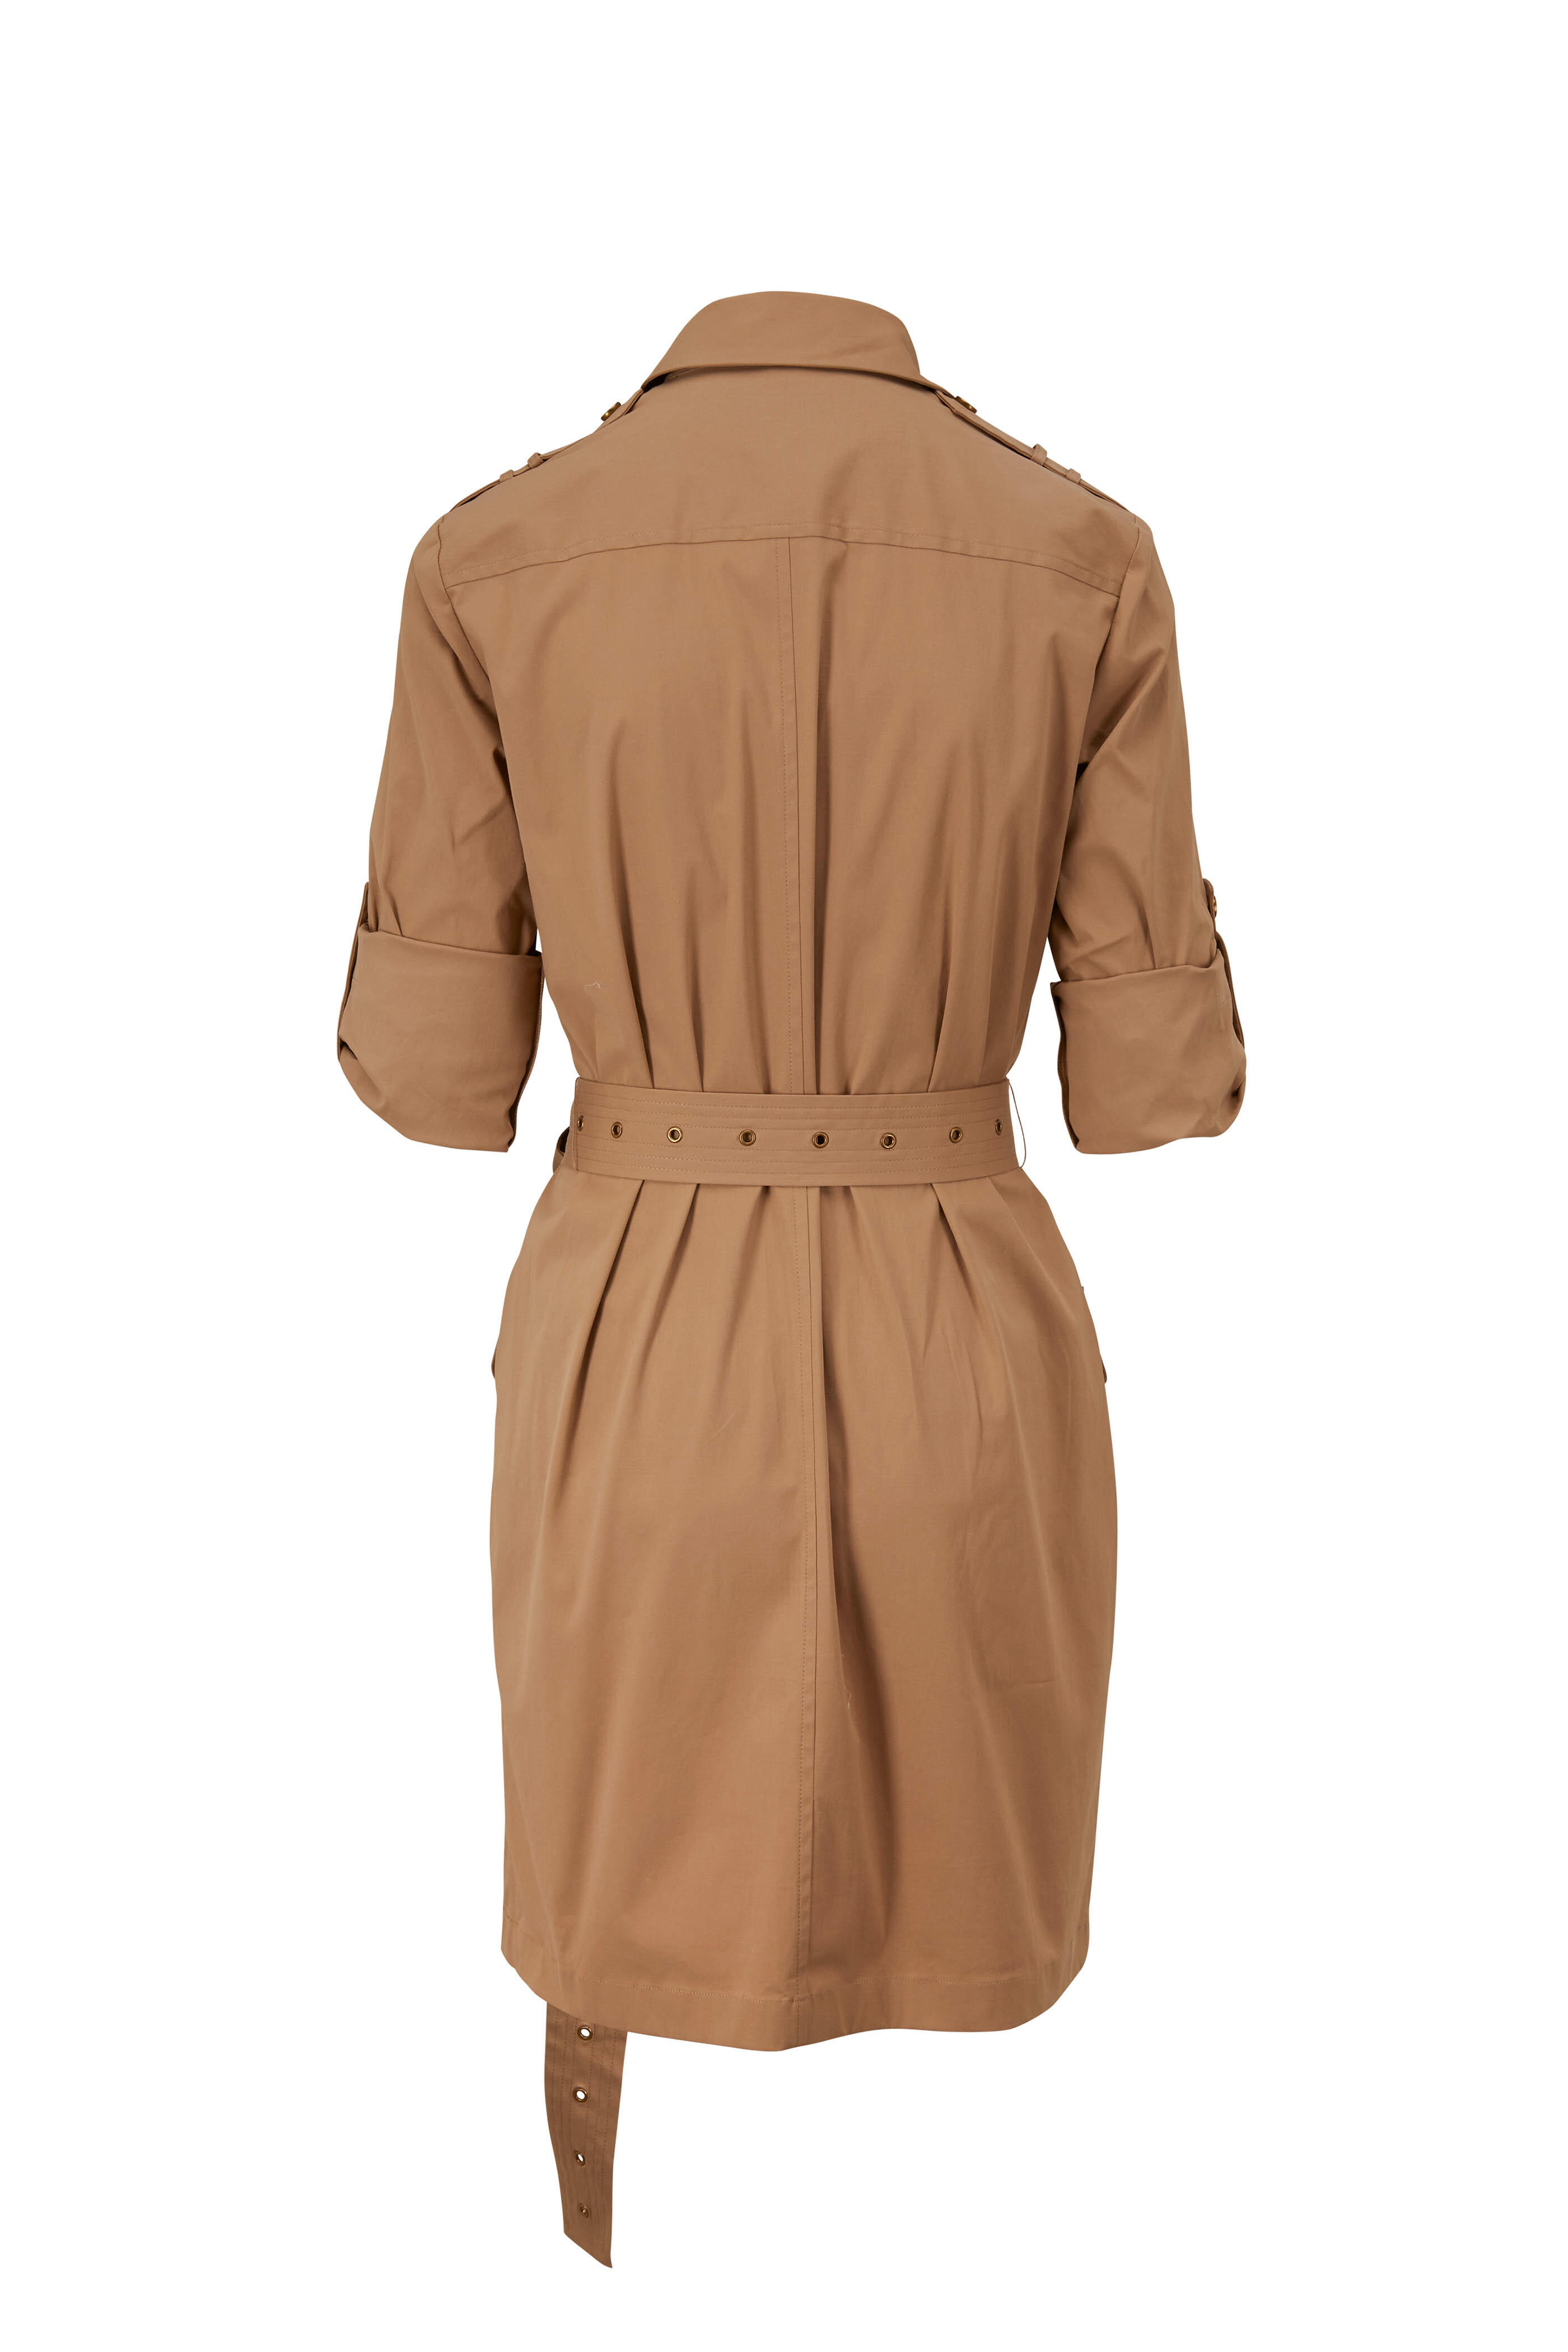 Michael Kors Collection - Barley Belted Utility Shirtdress